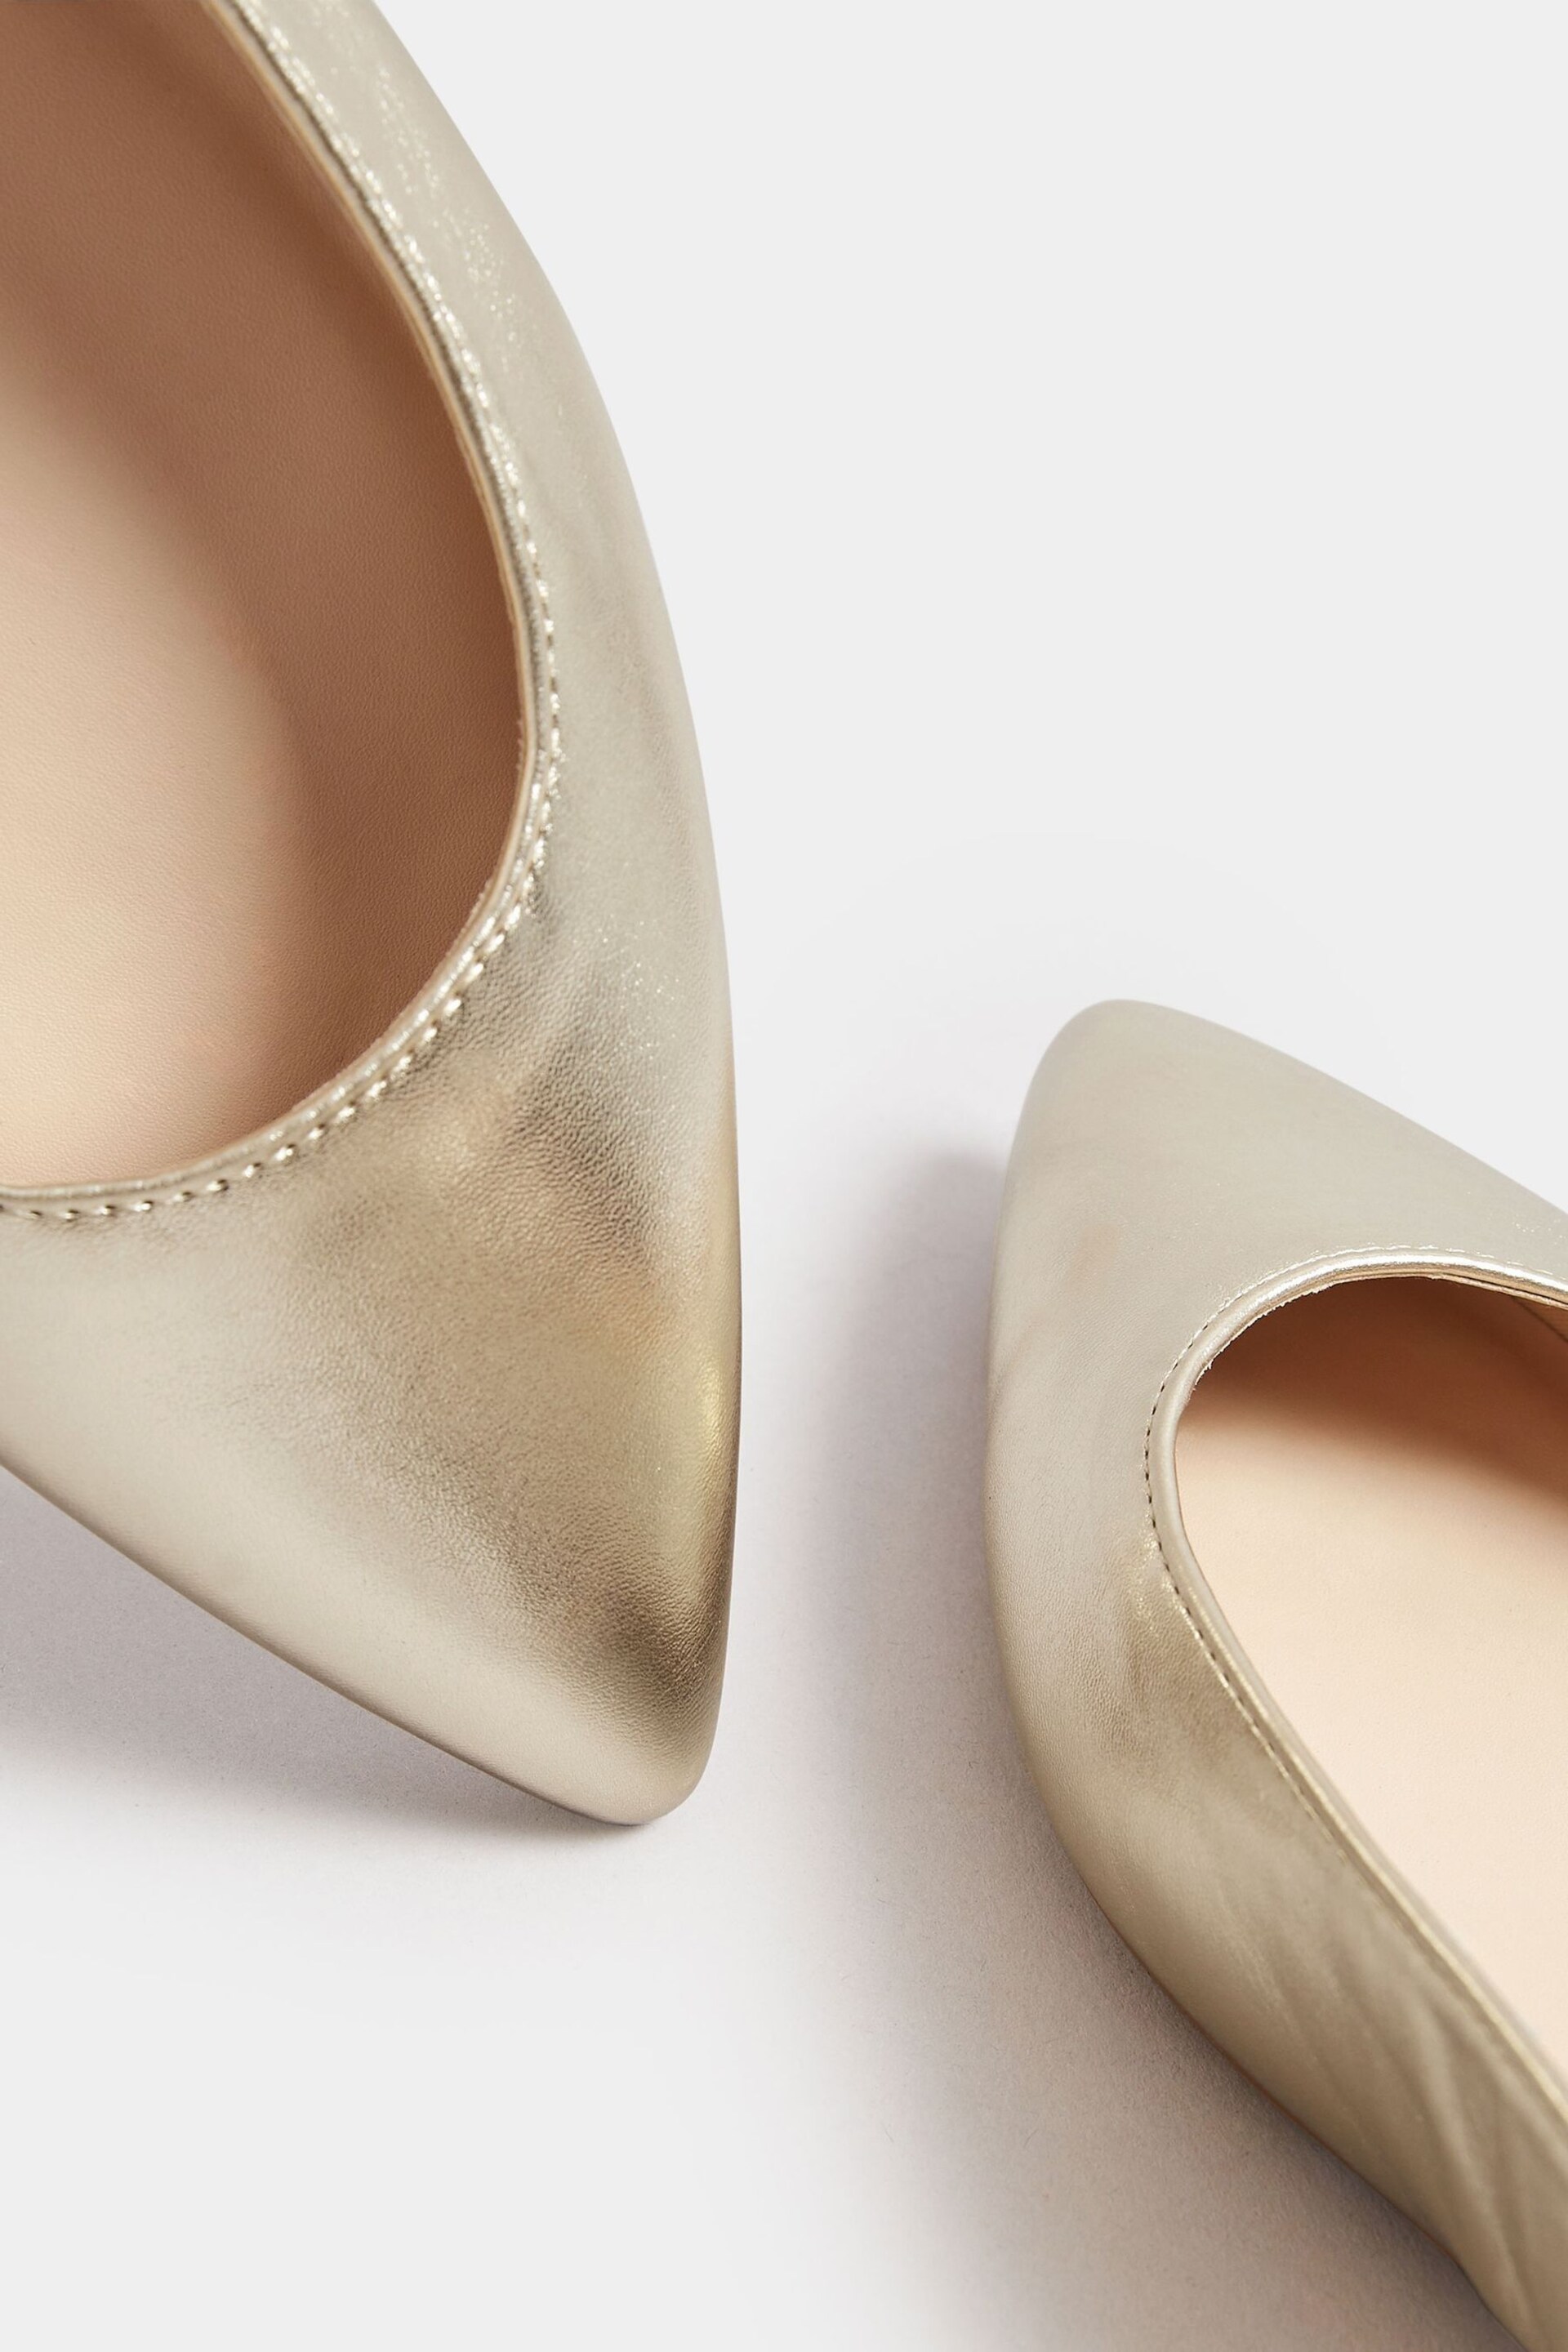 Long Tall Sally Gold Flat Point Slingback Shoes - Image 5 of 5